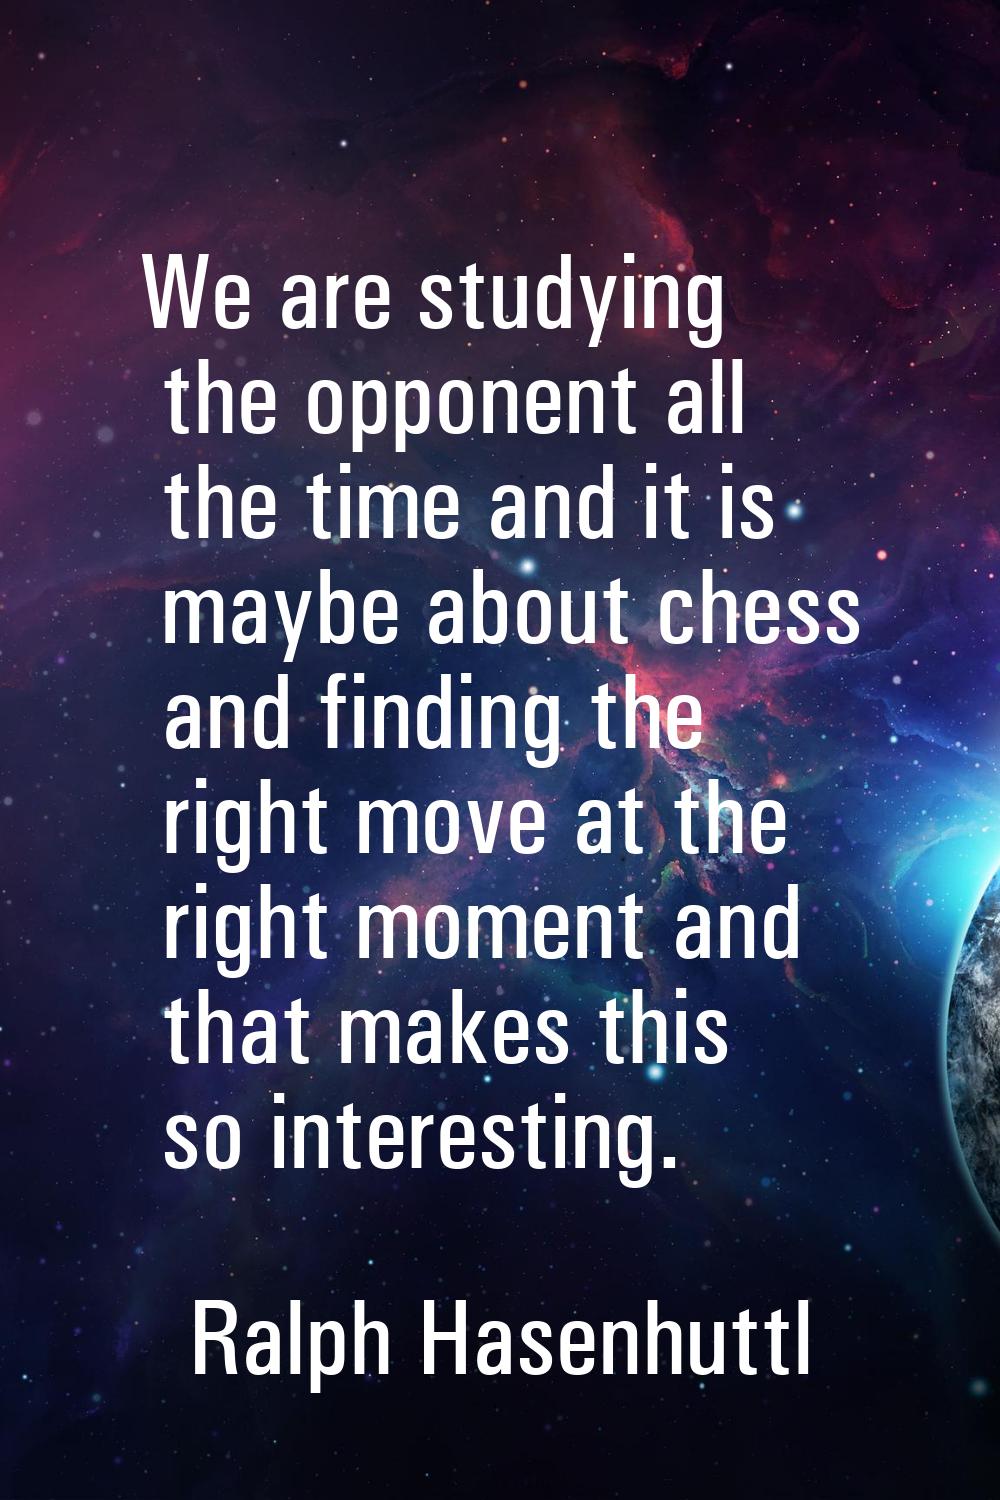 We are studying the opponent all the time and it is maybe about chess and finding the right move at